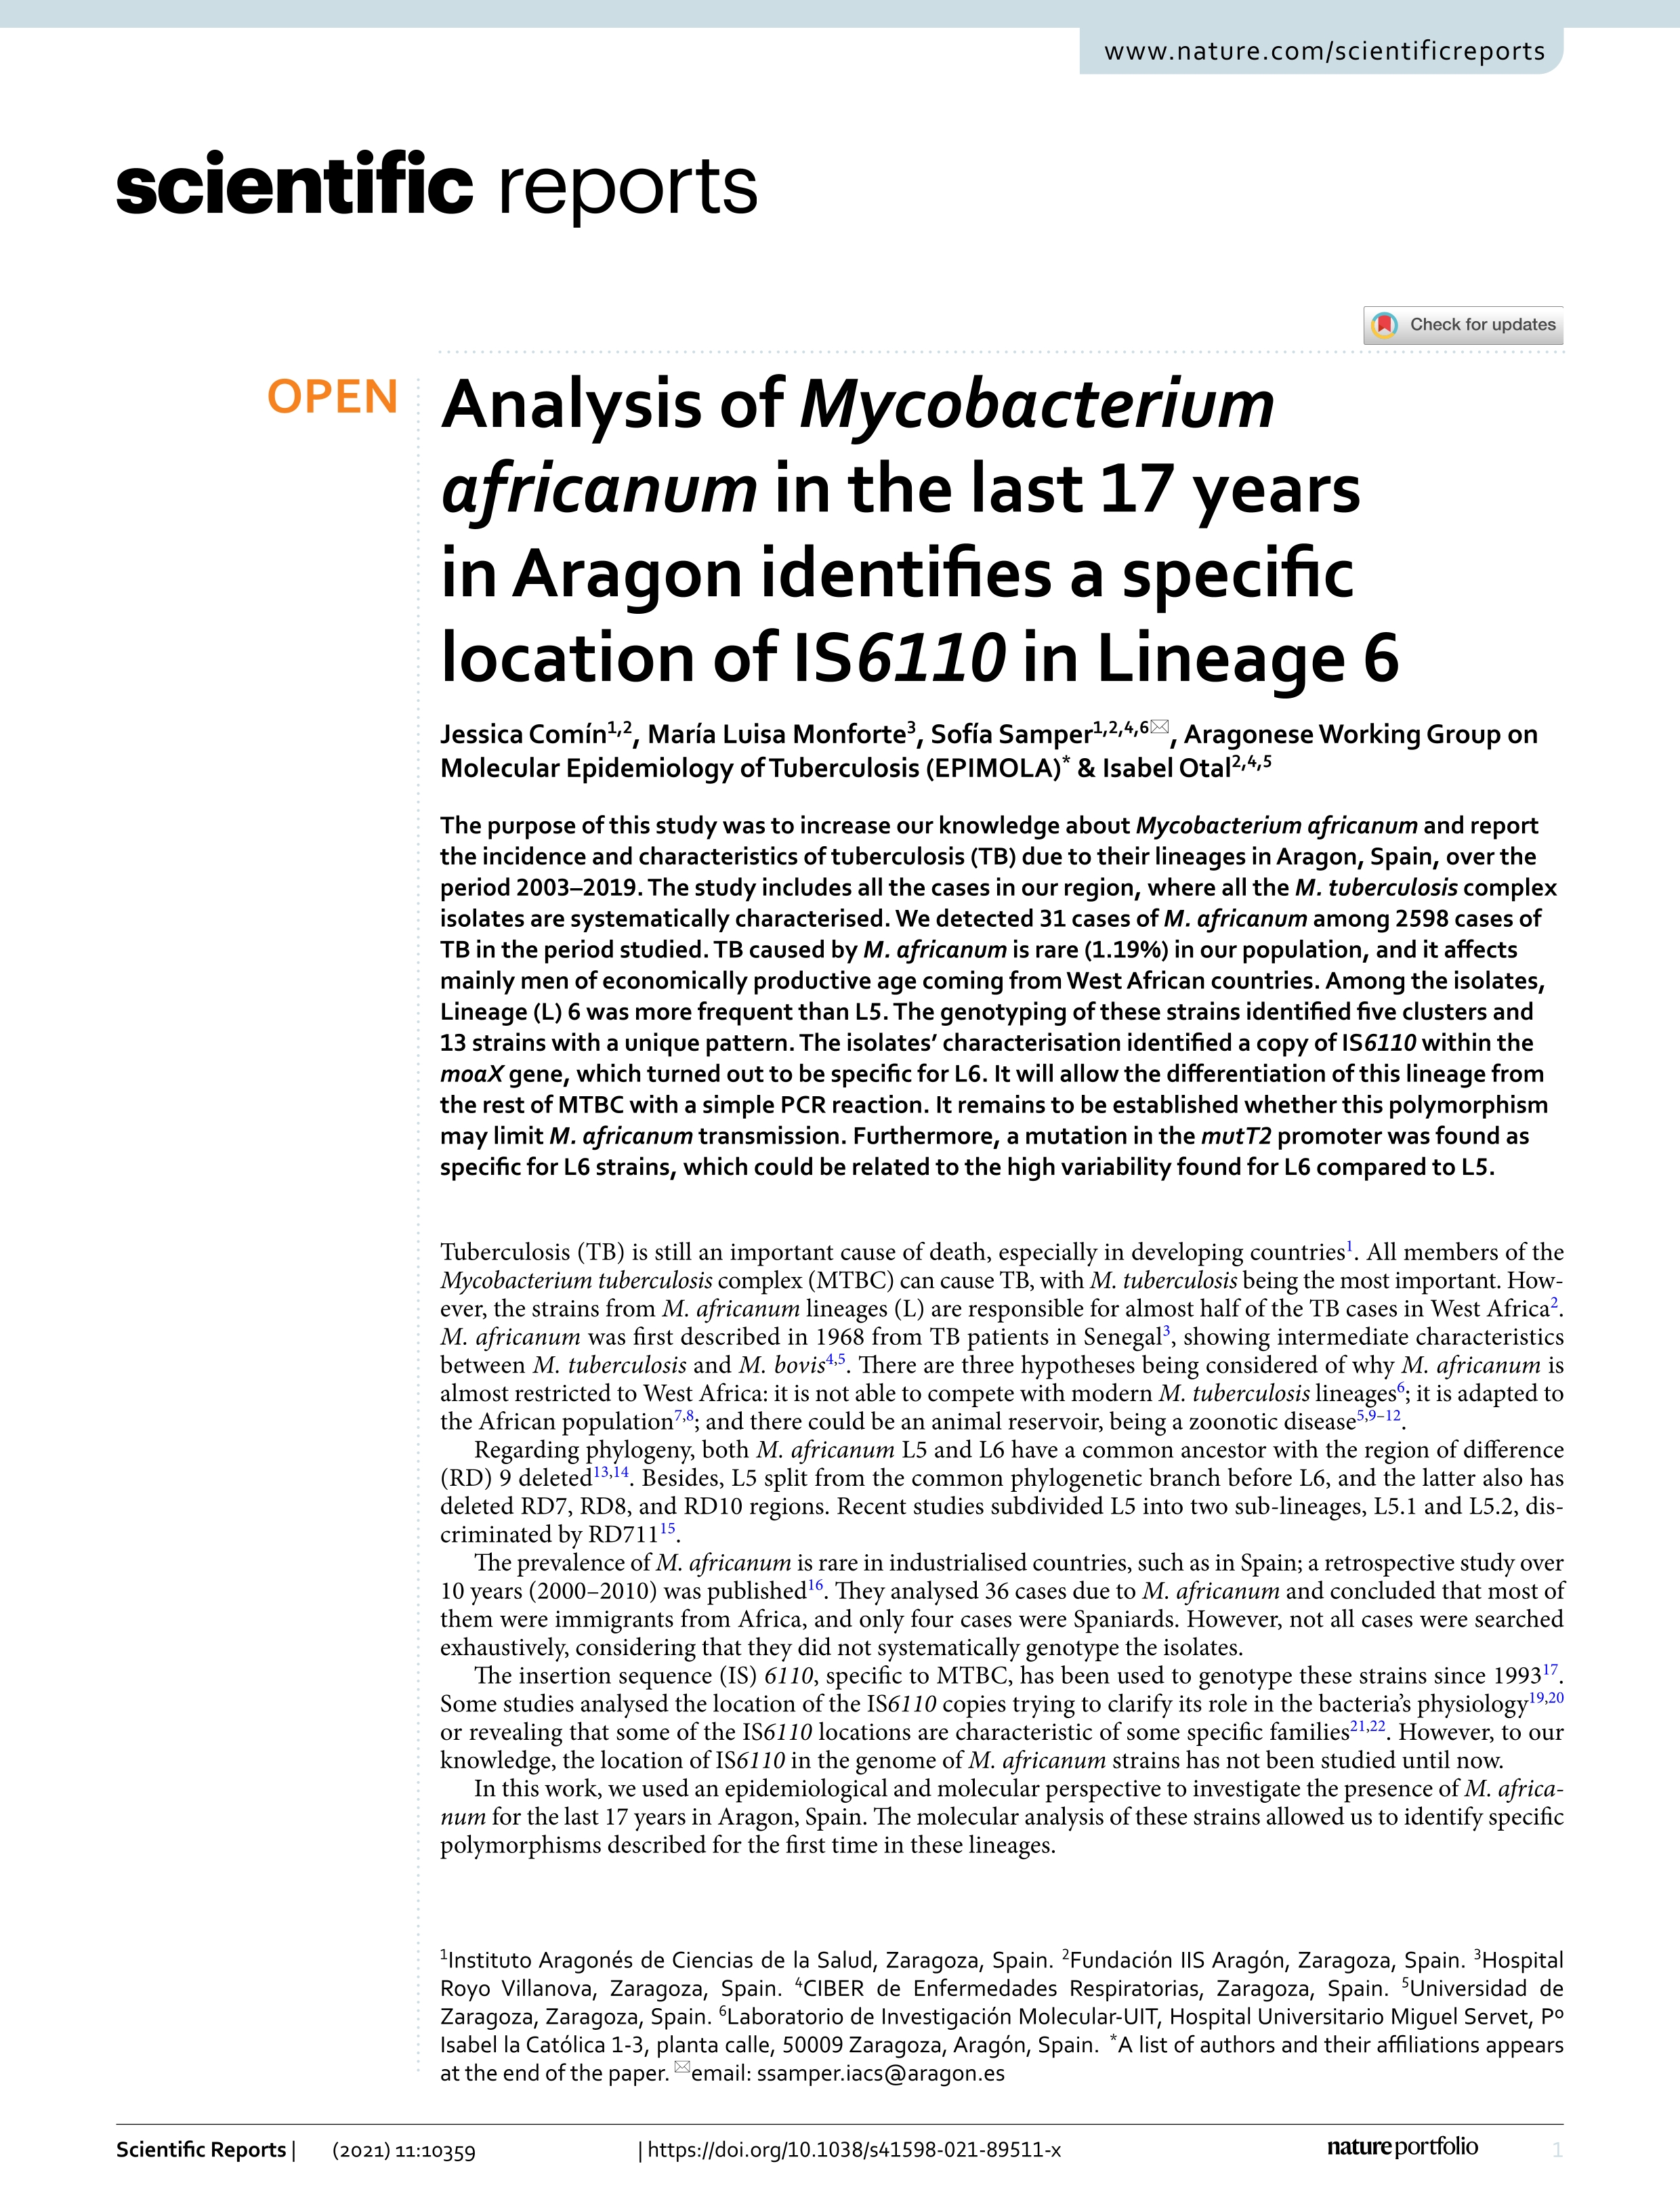 Analysis of Mycobacterium africanum in the last 17 years in Aragon identifies a specific location of IS6110 in Lineage 6